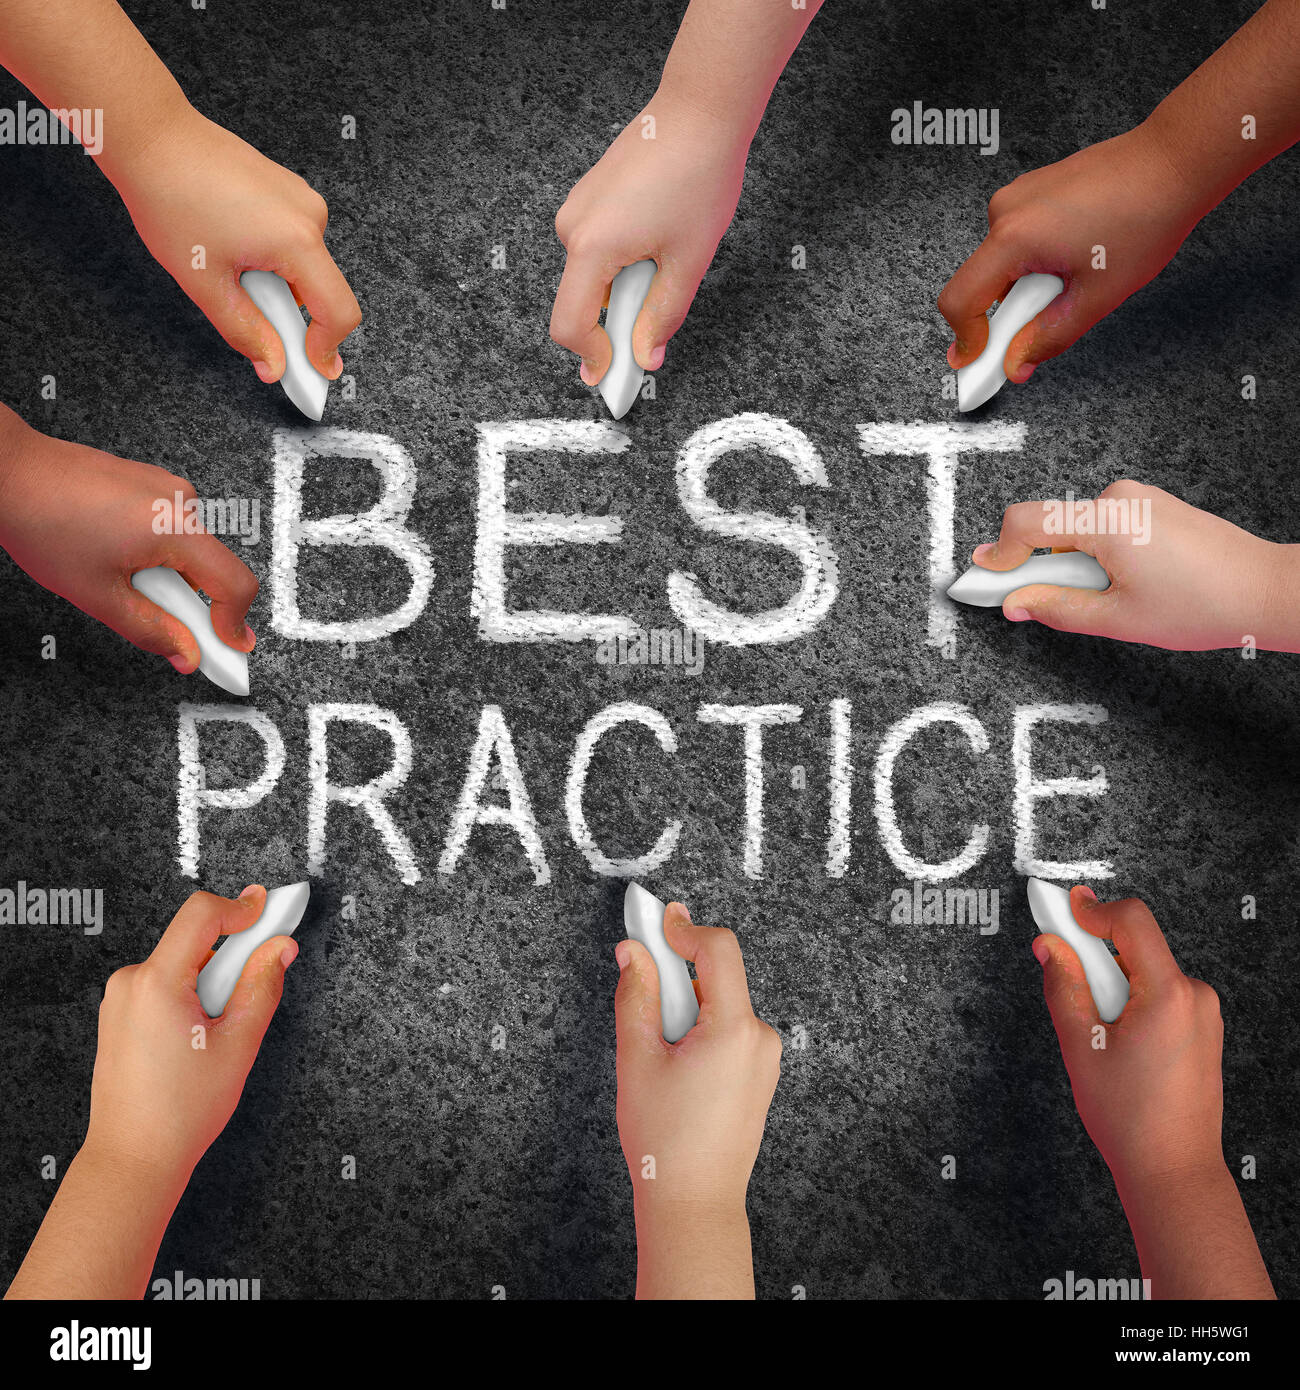 Best practice business concept as a group of hands drawing text on an asphalt street as a development metaphor for excellence in method in a 3D illust Stock Photo